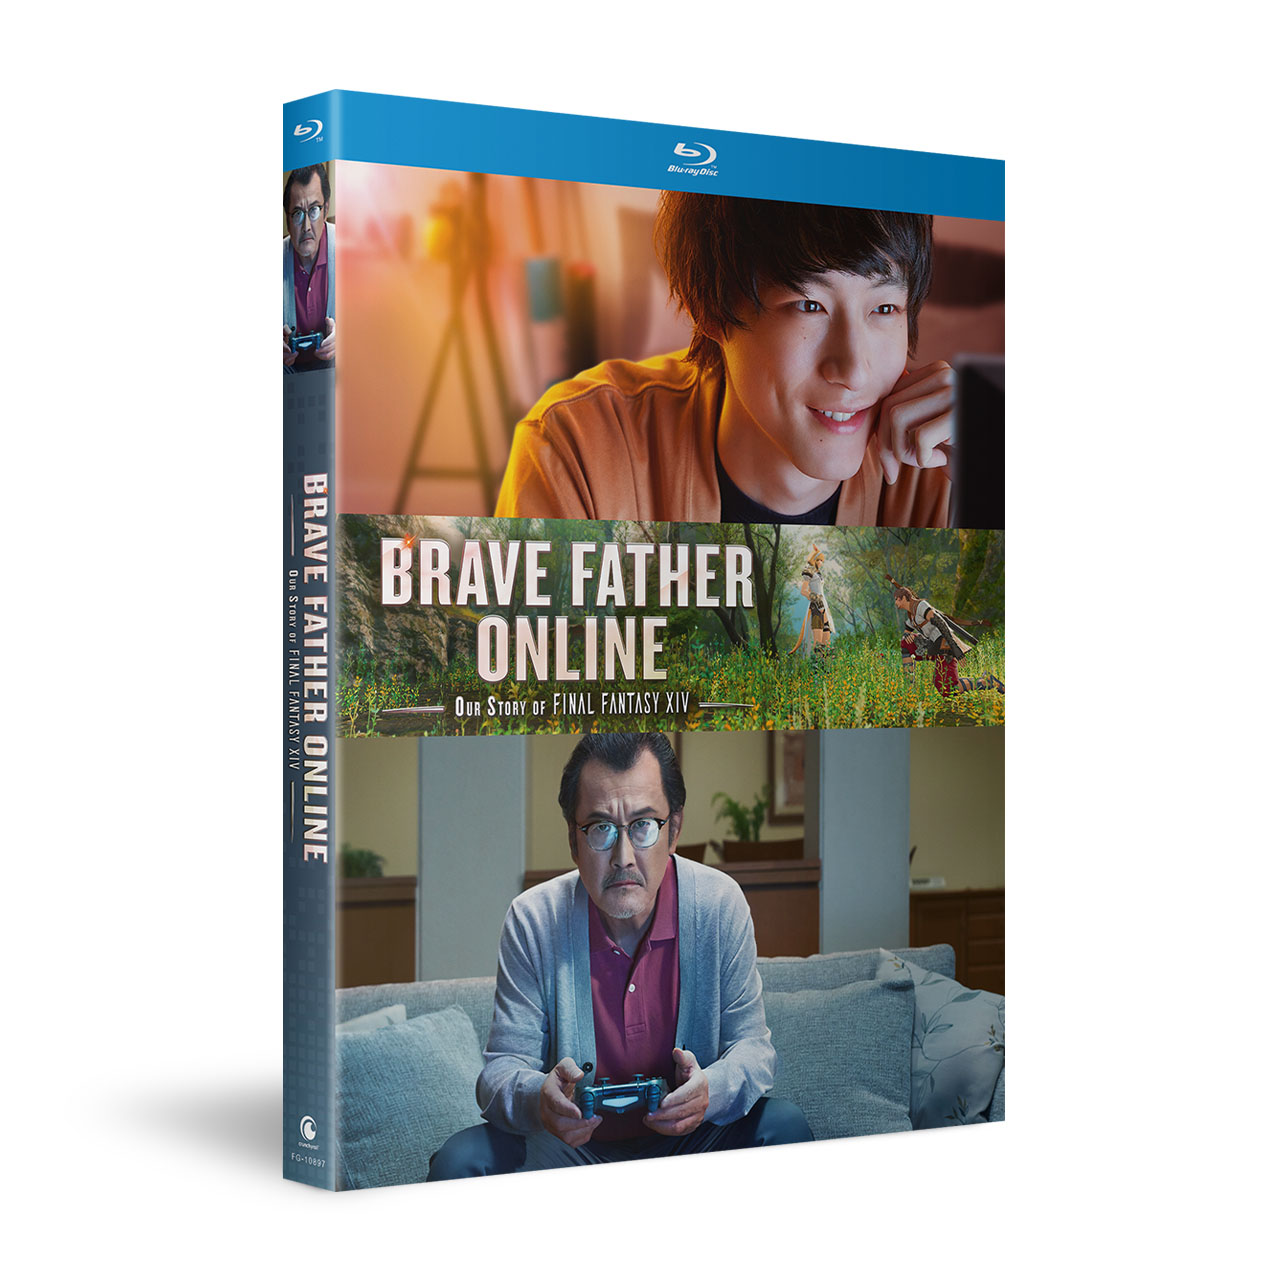 Brave Father Online: Our Story of Final Fantasy XIV - SUB ONLY - Blu-ray image count 2